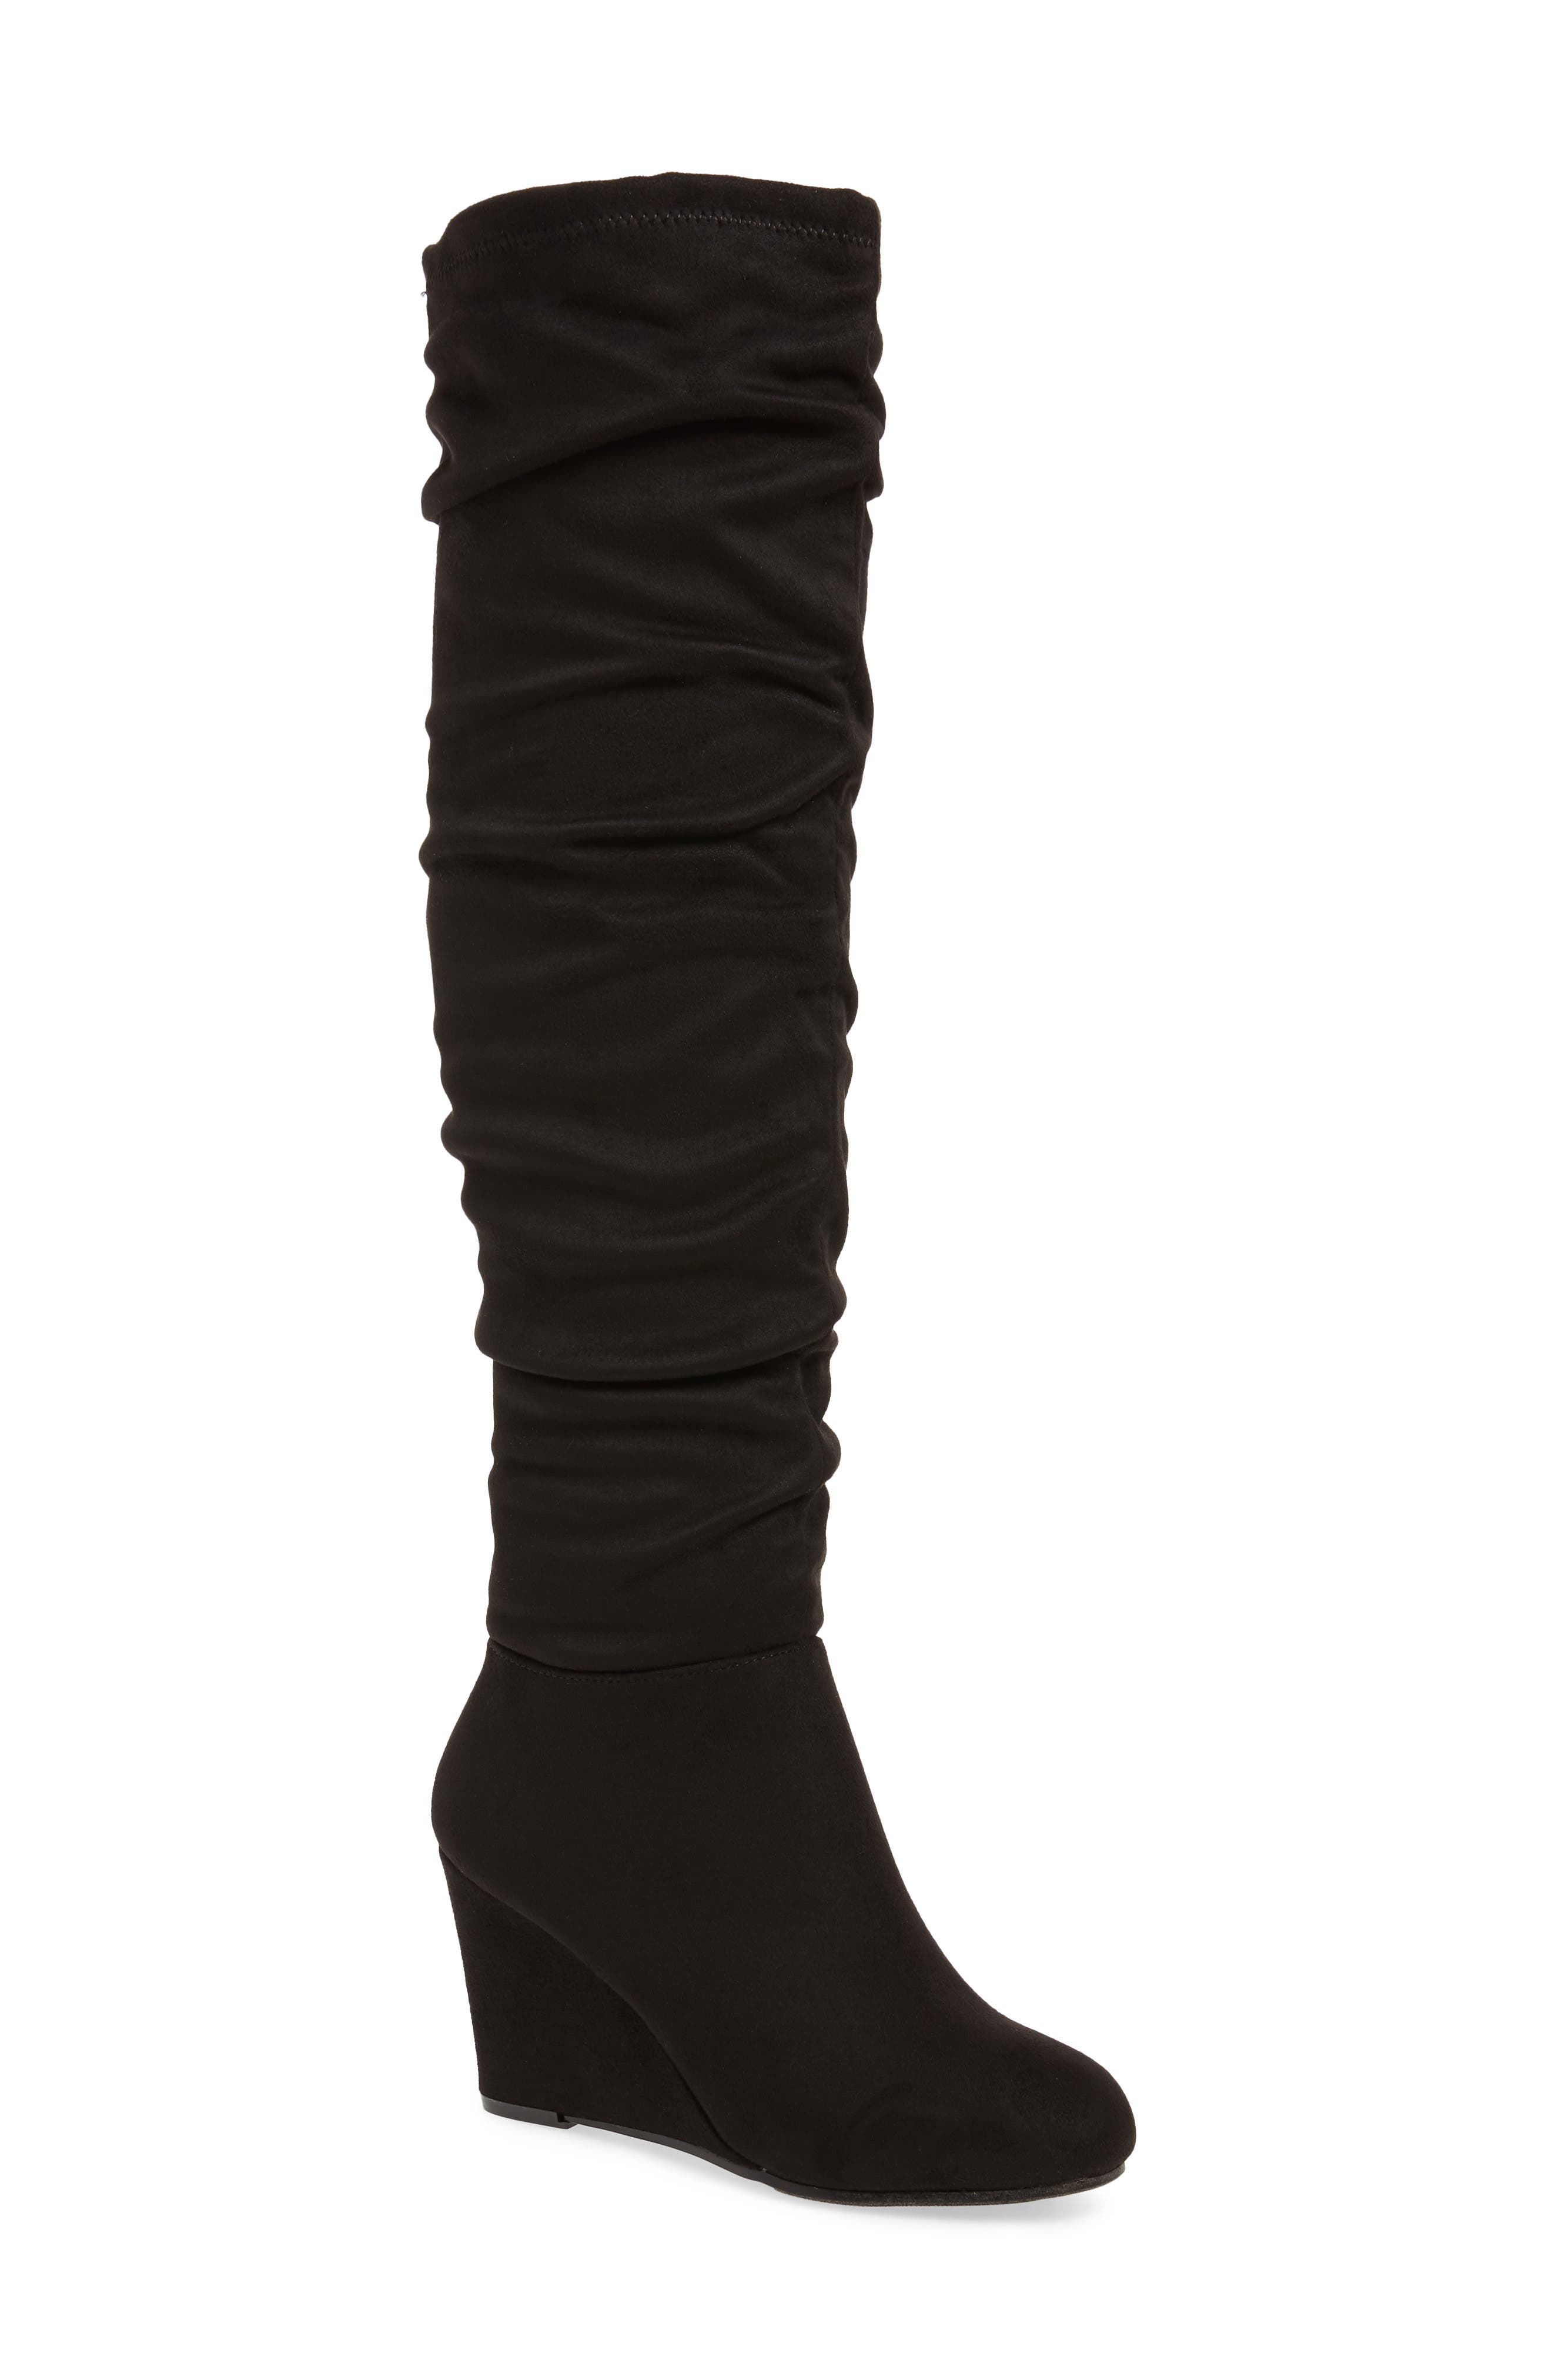 chinese laundry over the knee wedge boots